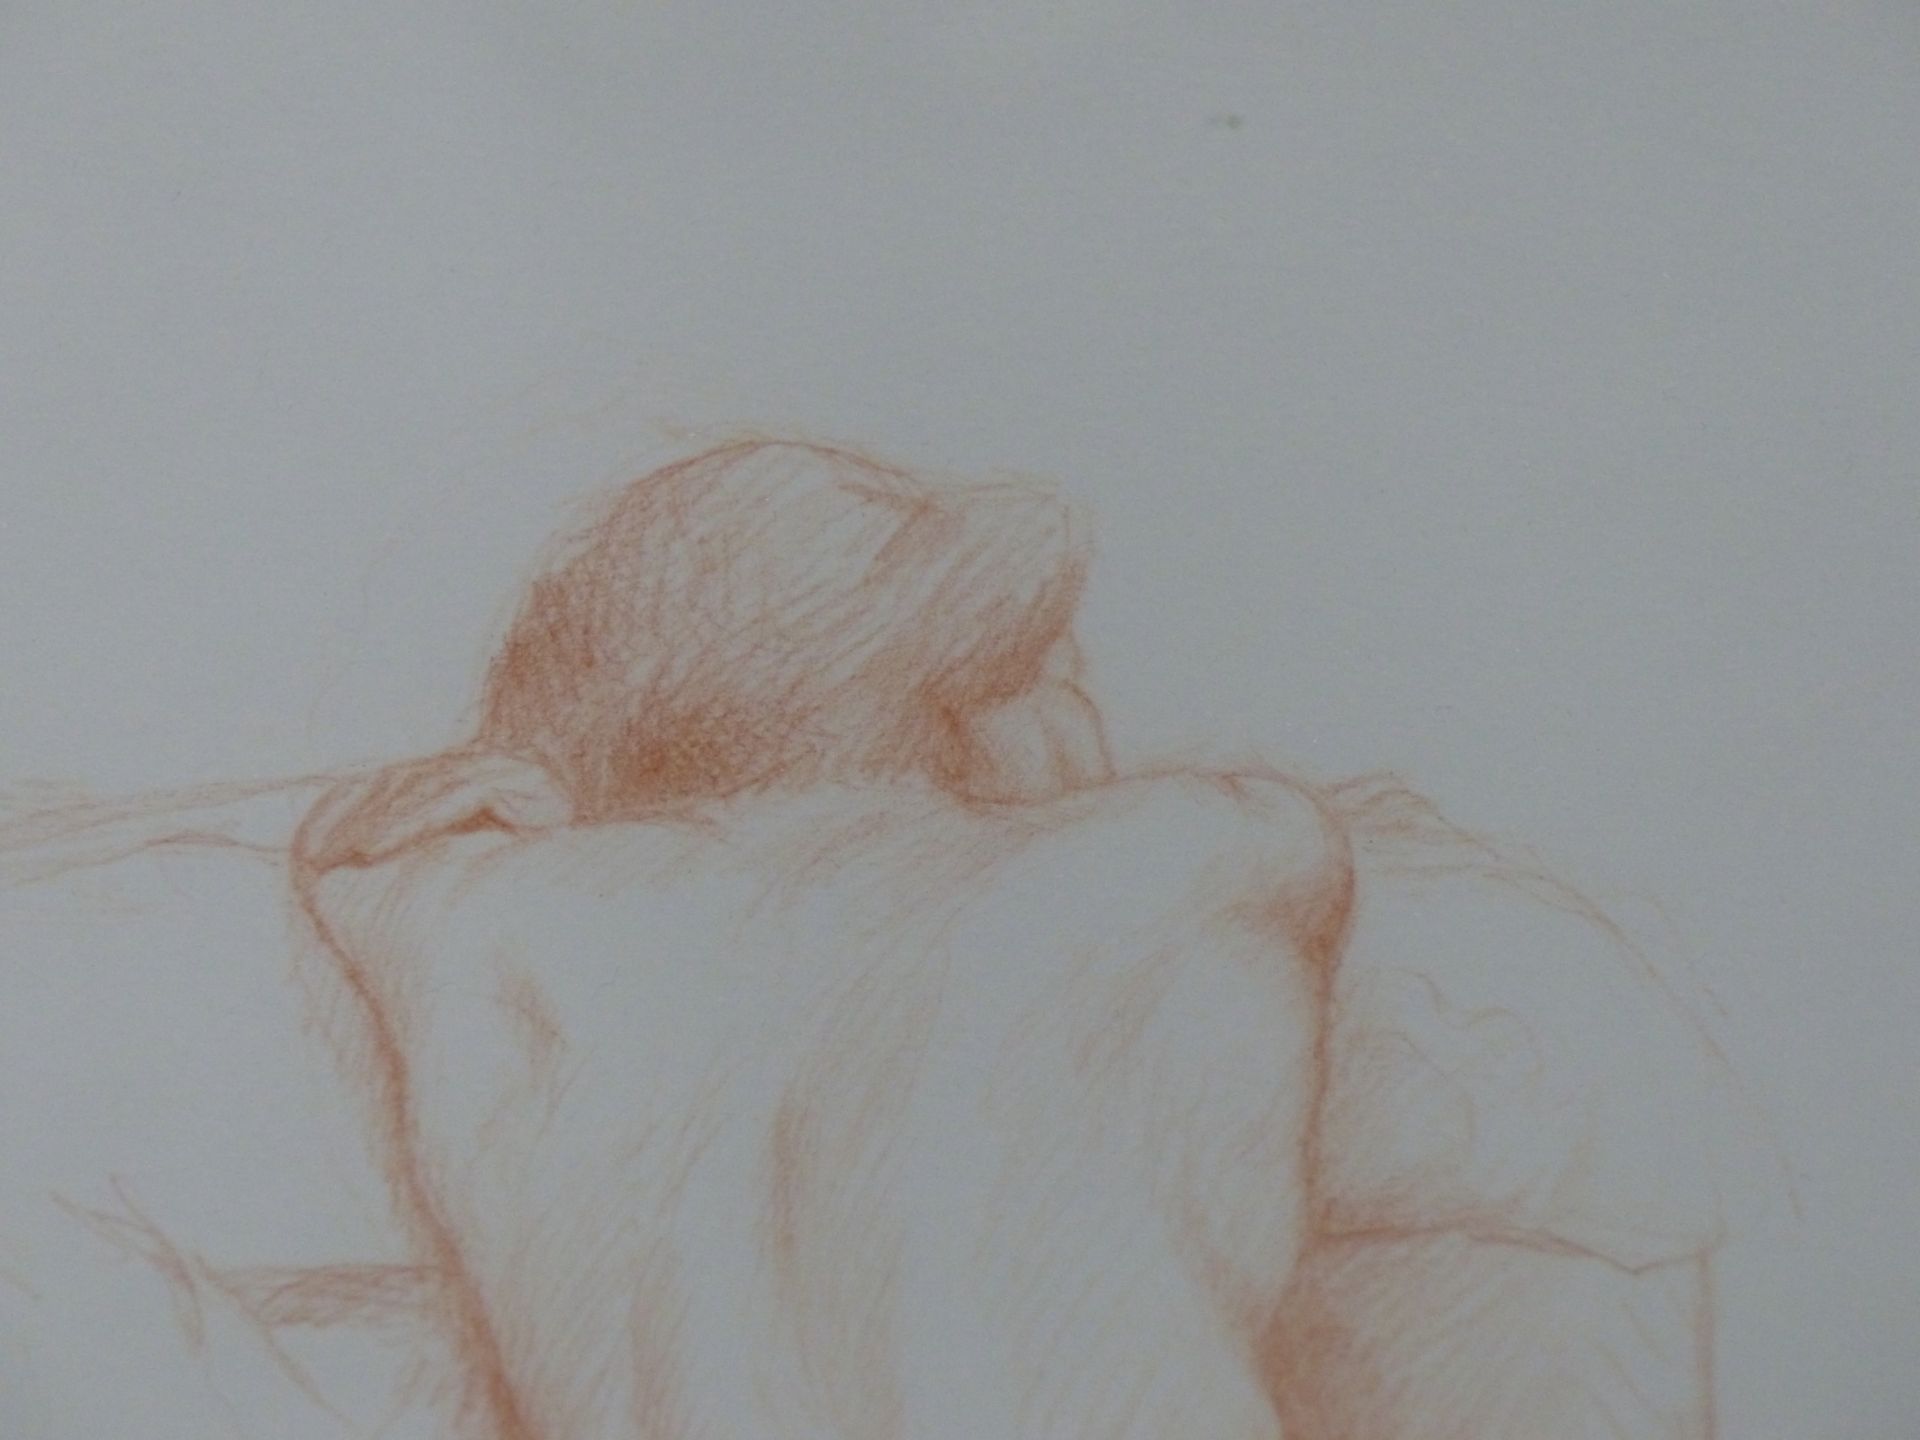 A LATE 20TH CENTURY RED CHALK STUDY OF A NUDE, INDISTINCTLY SIGNED (GUMB?) AND DATED '97, EXHIBITION - Image 4 of 10